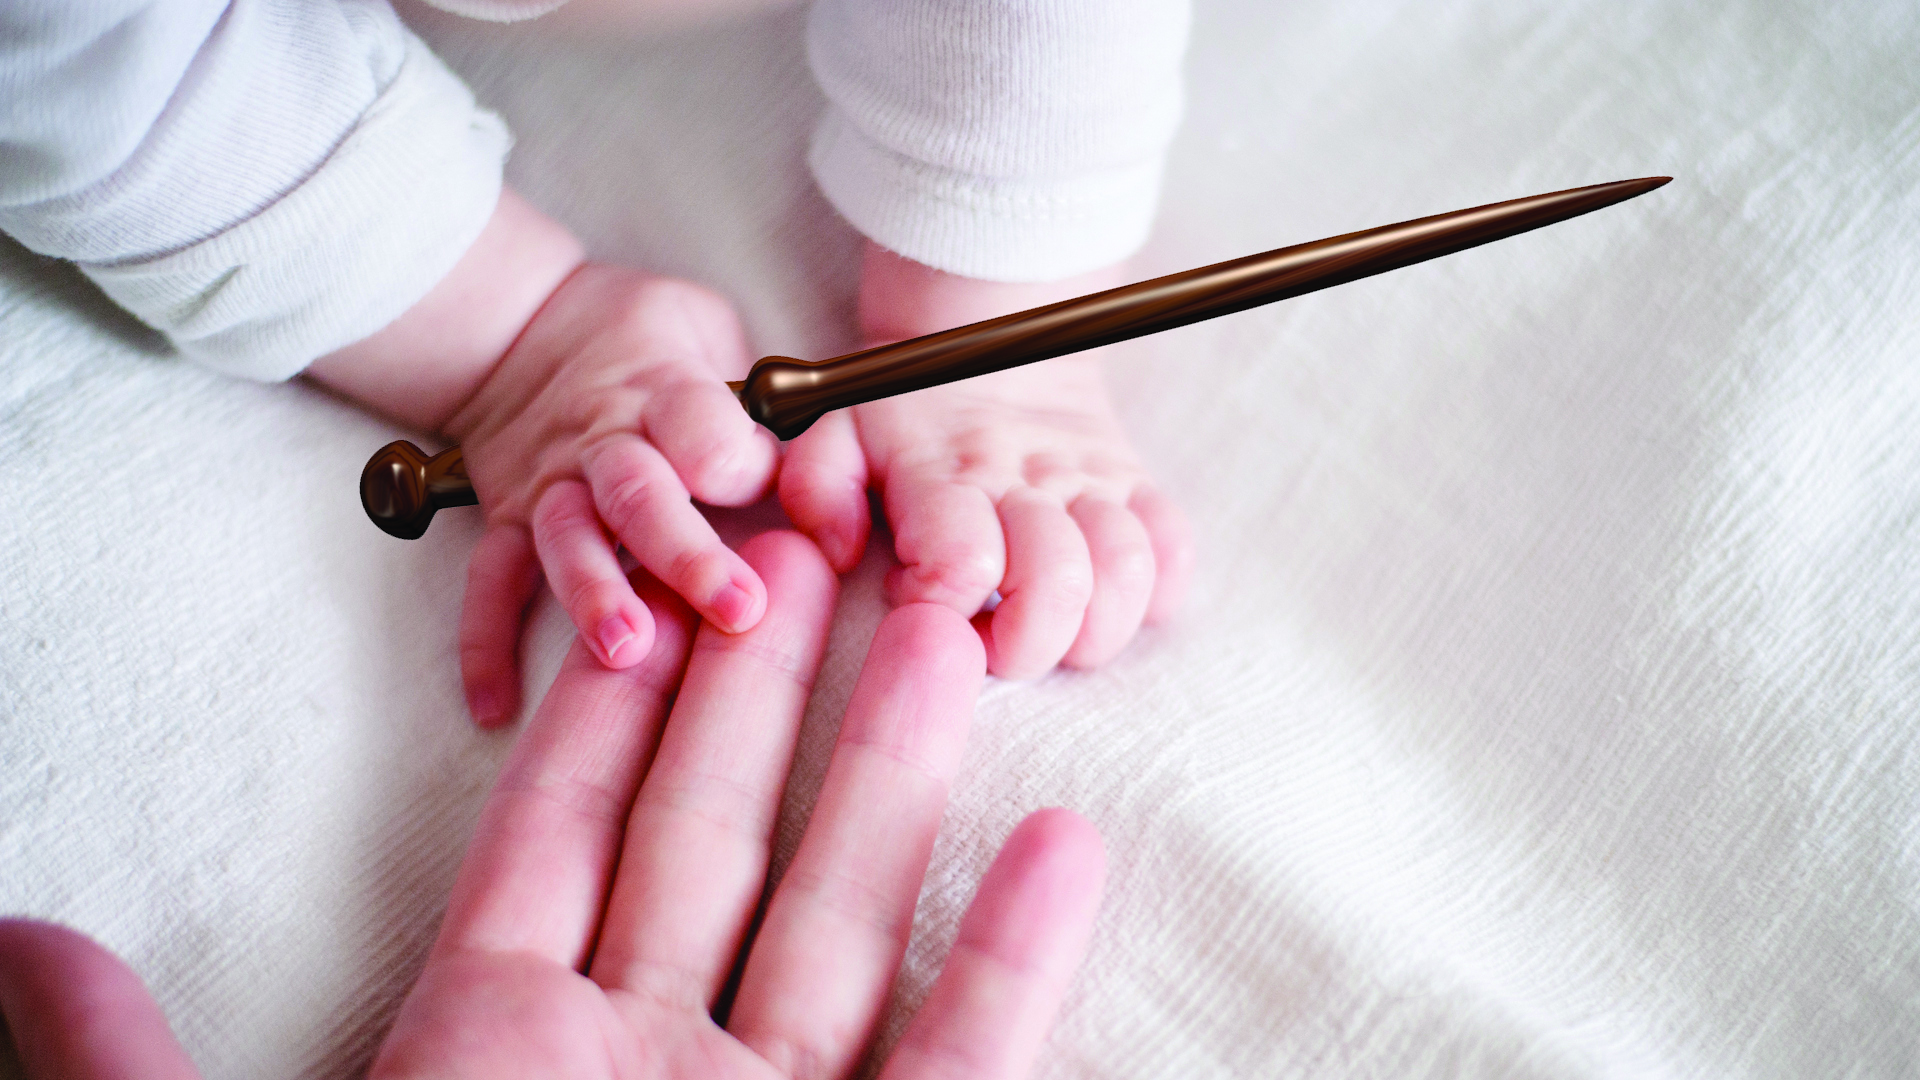 A baby holding a wand